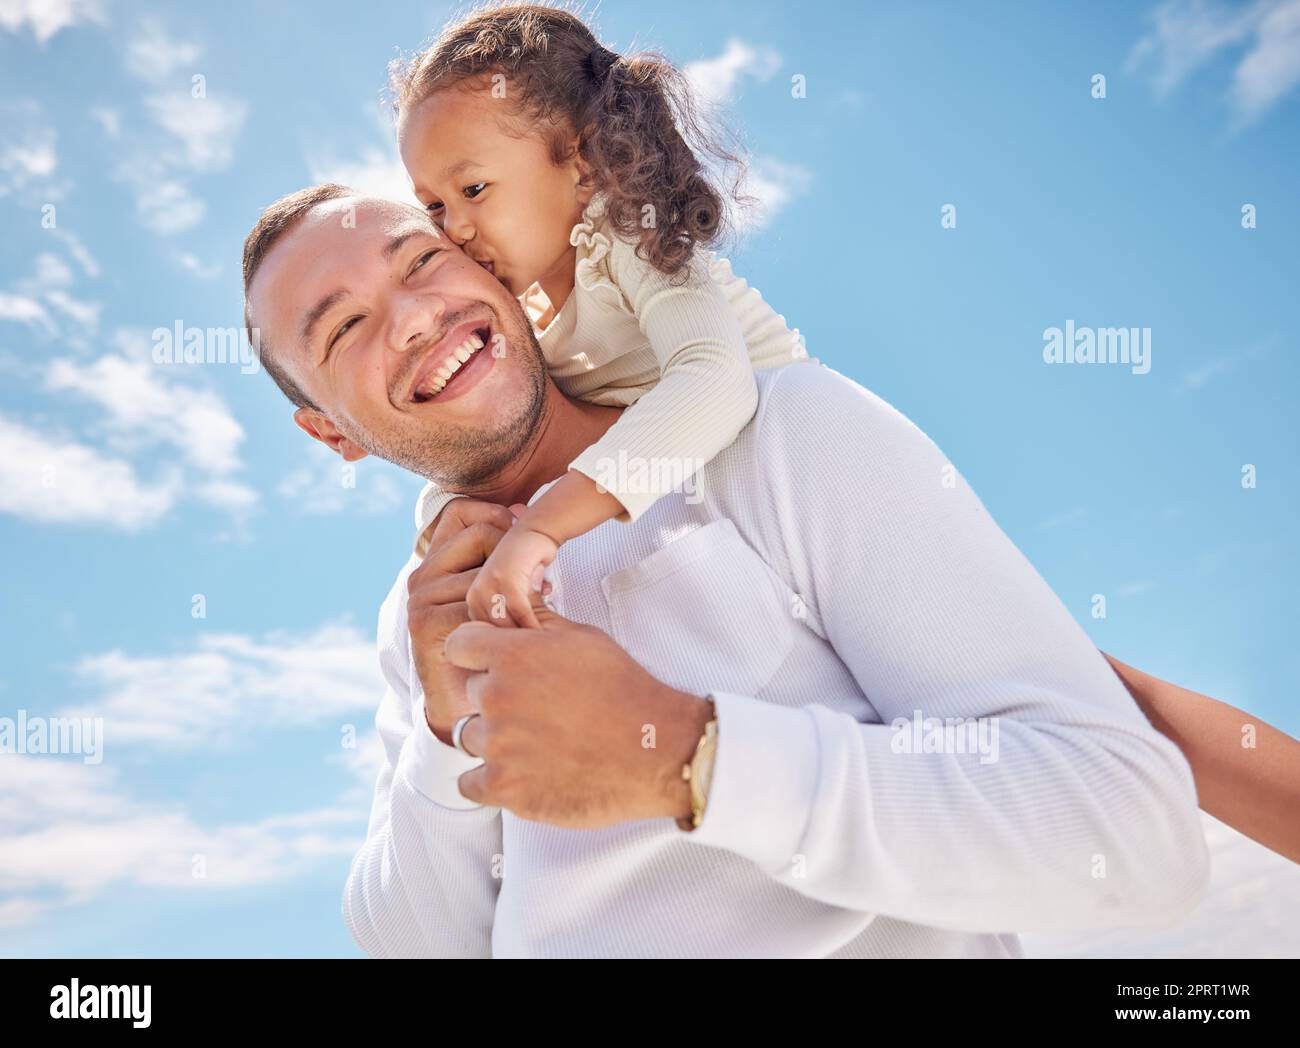 Girl child kiss dad with love, smile and care playing together on summer day with sunny blue sky outdoor. Happy smiling family man or father with beautiful Asian baby girl hug have fun and happiness Stock Photo